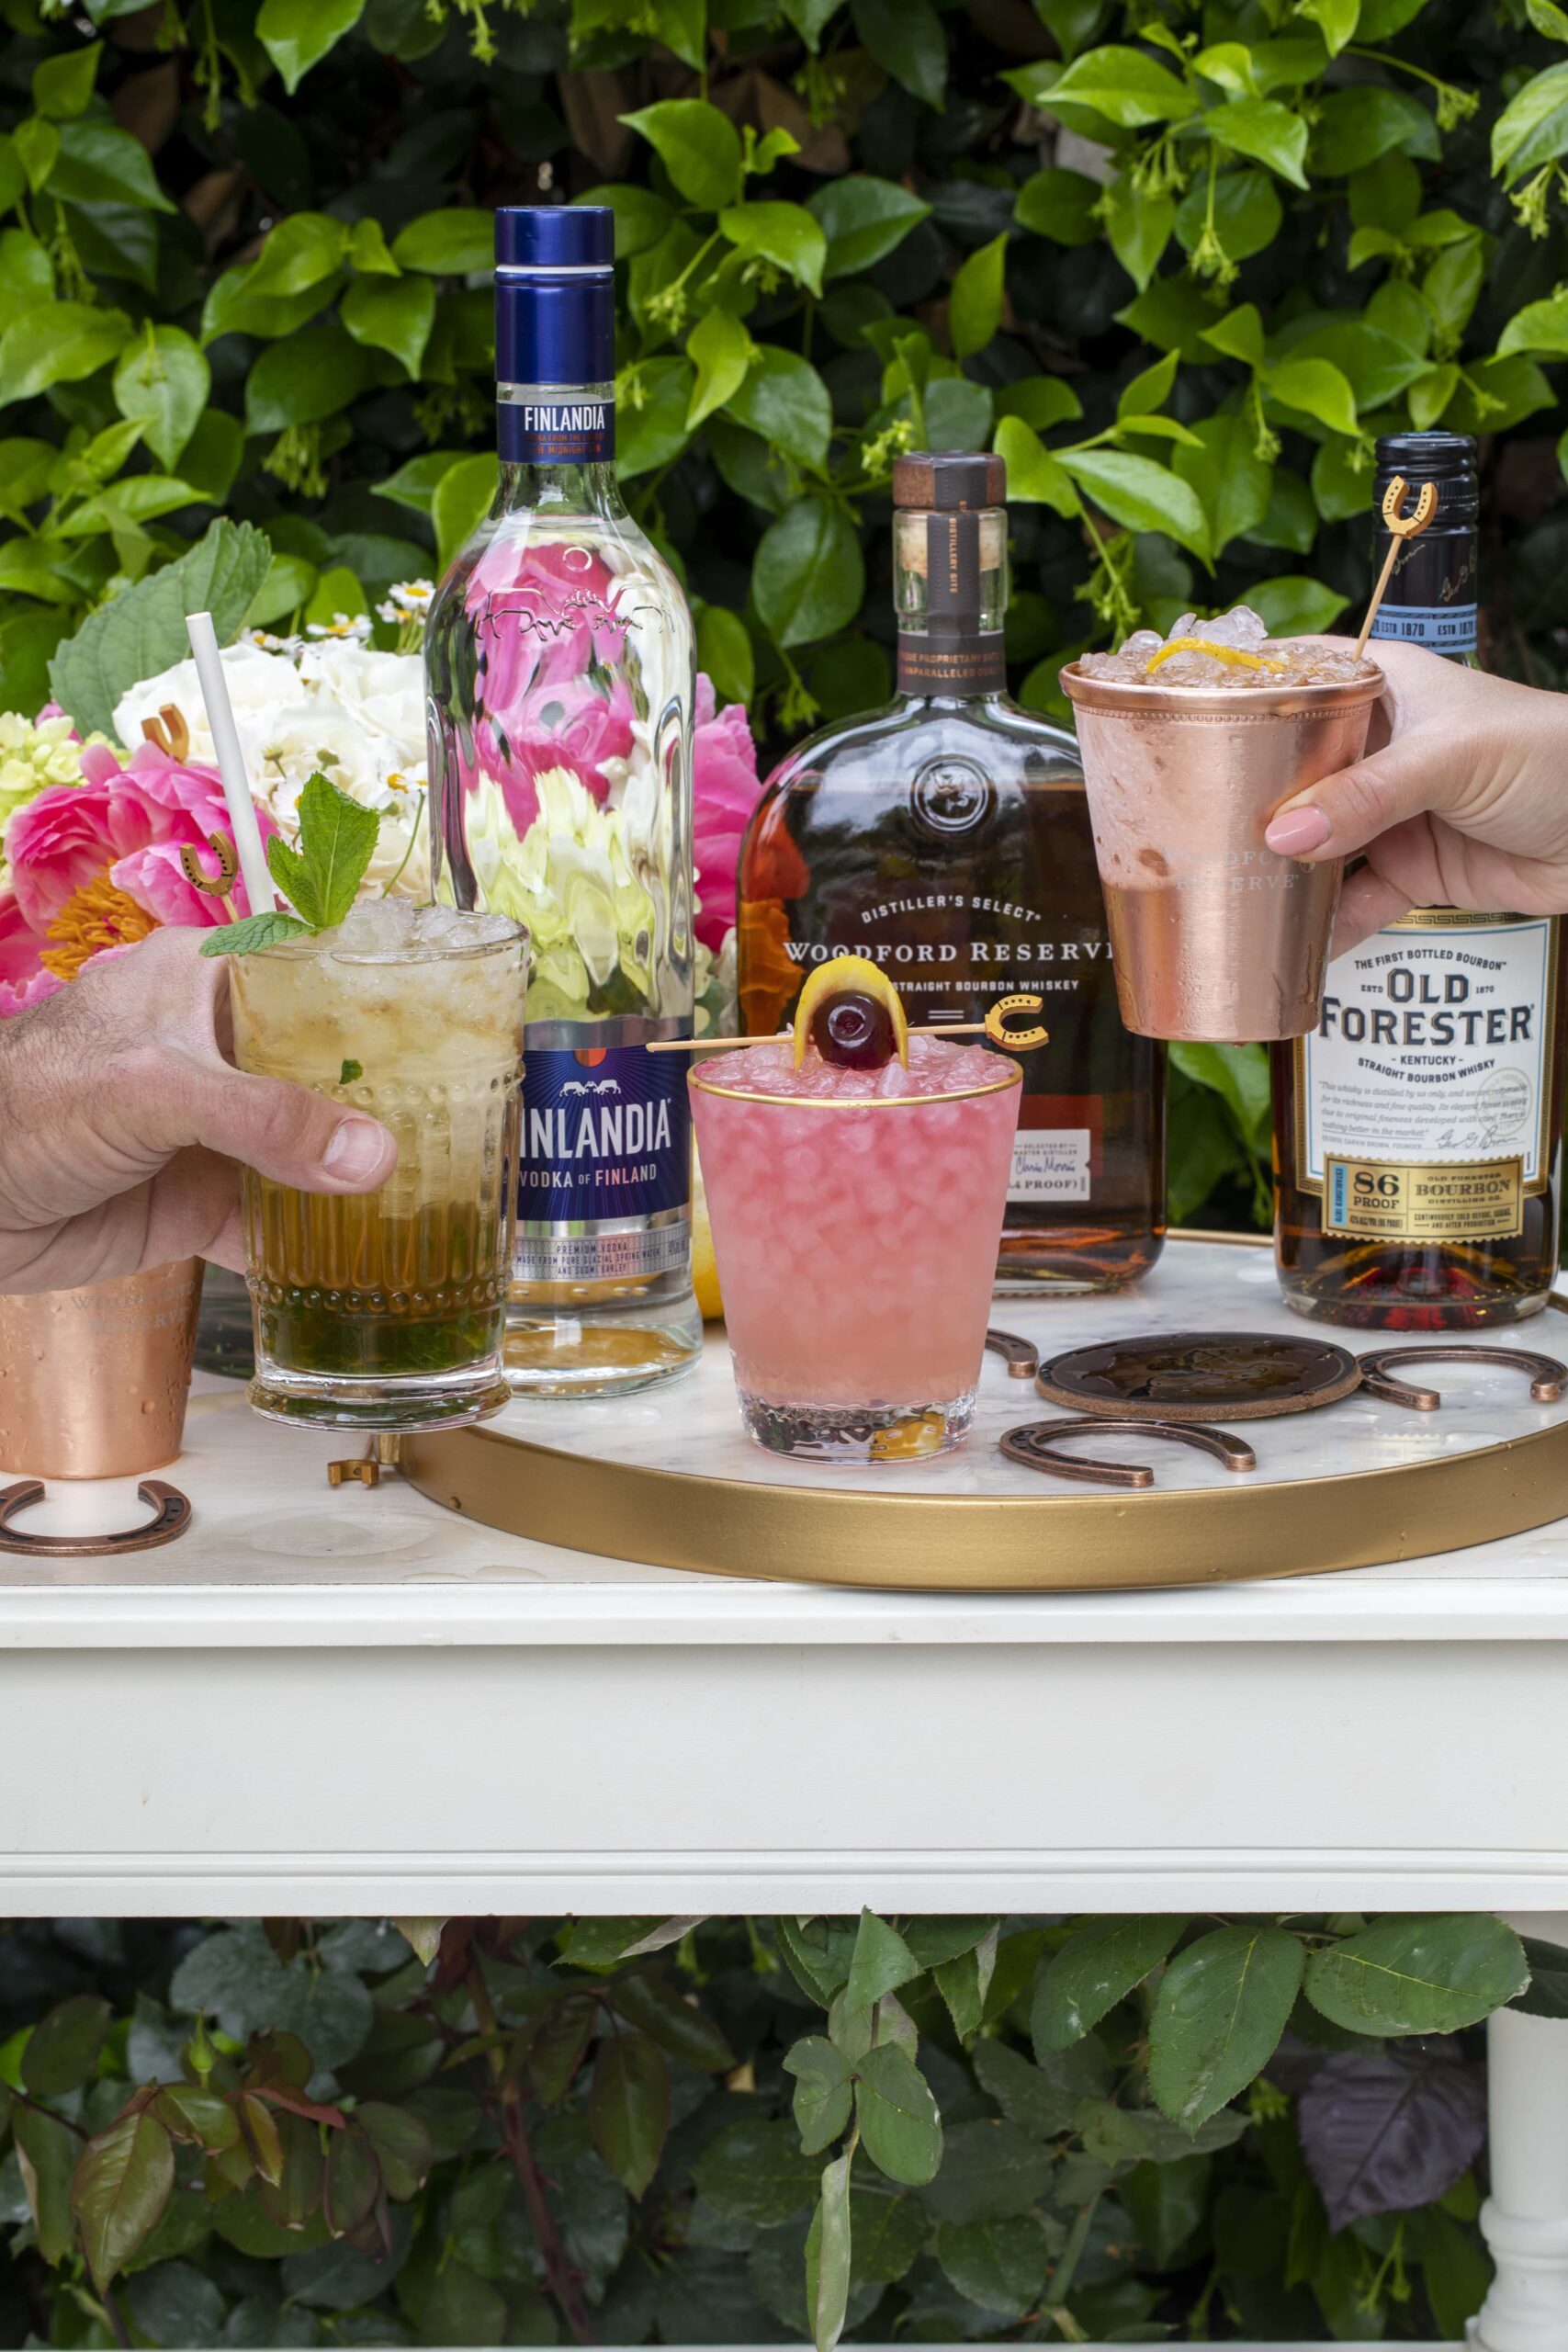 Three classic cocktails you can make at home to celebrate the Kentucky Derby.